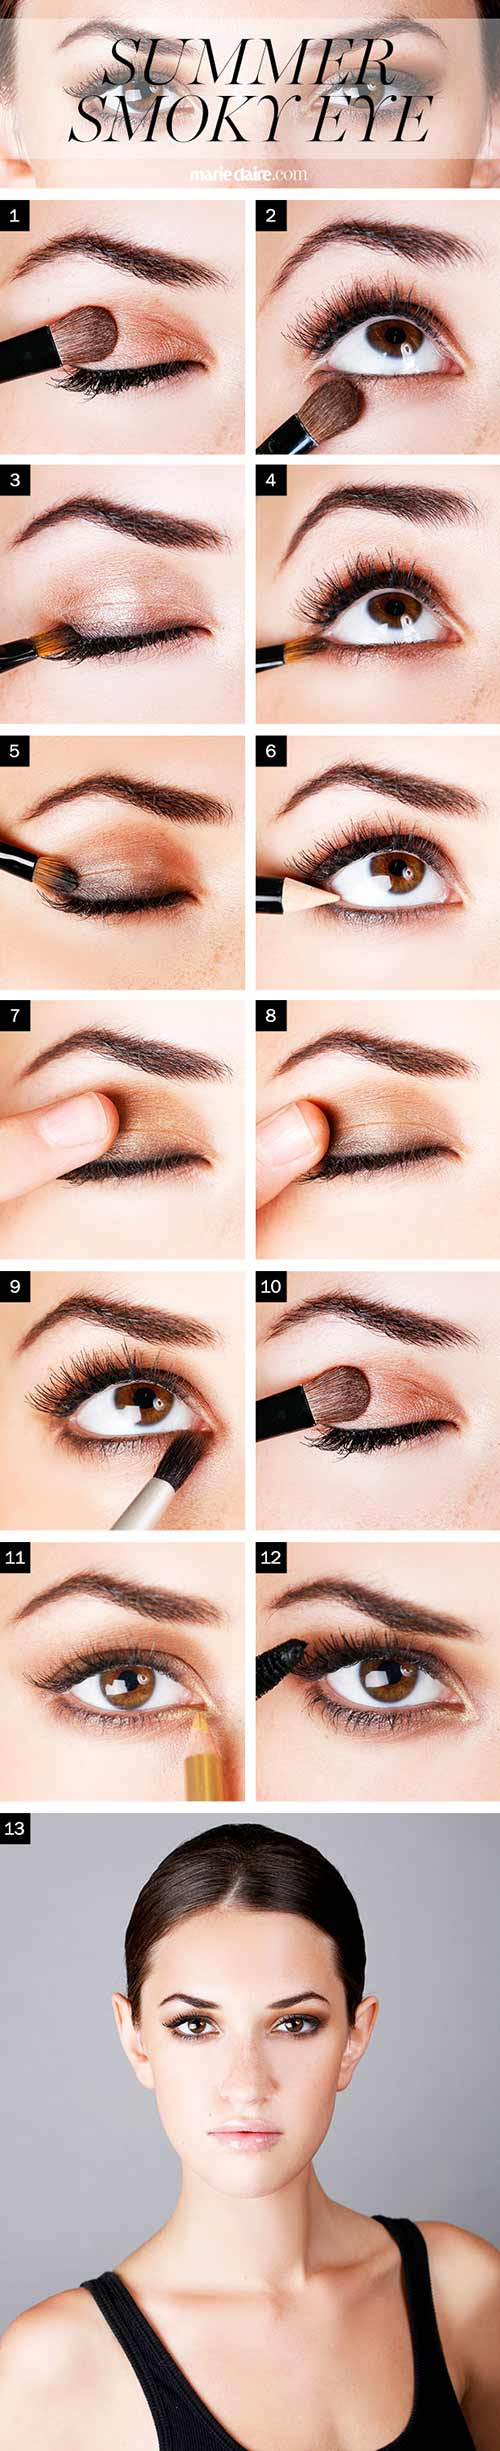 Dark Eye Makeup How To Do Smokey Eye Makeup Top 10 Tutorial Pictures For 2019